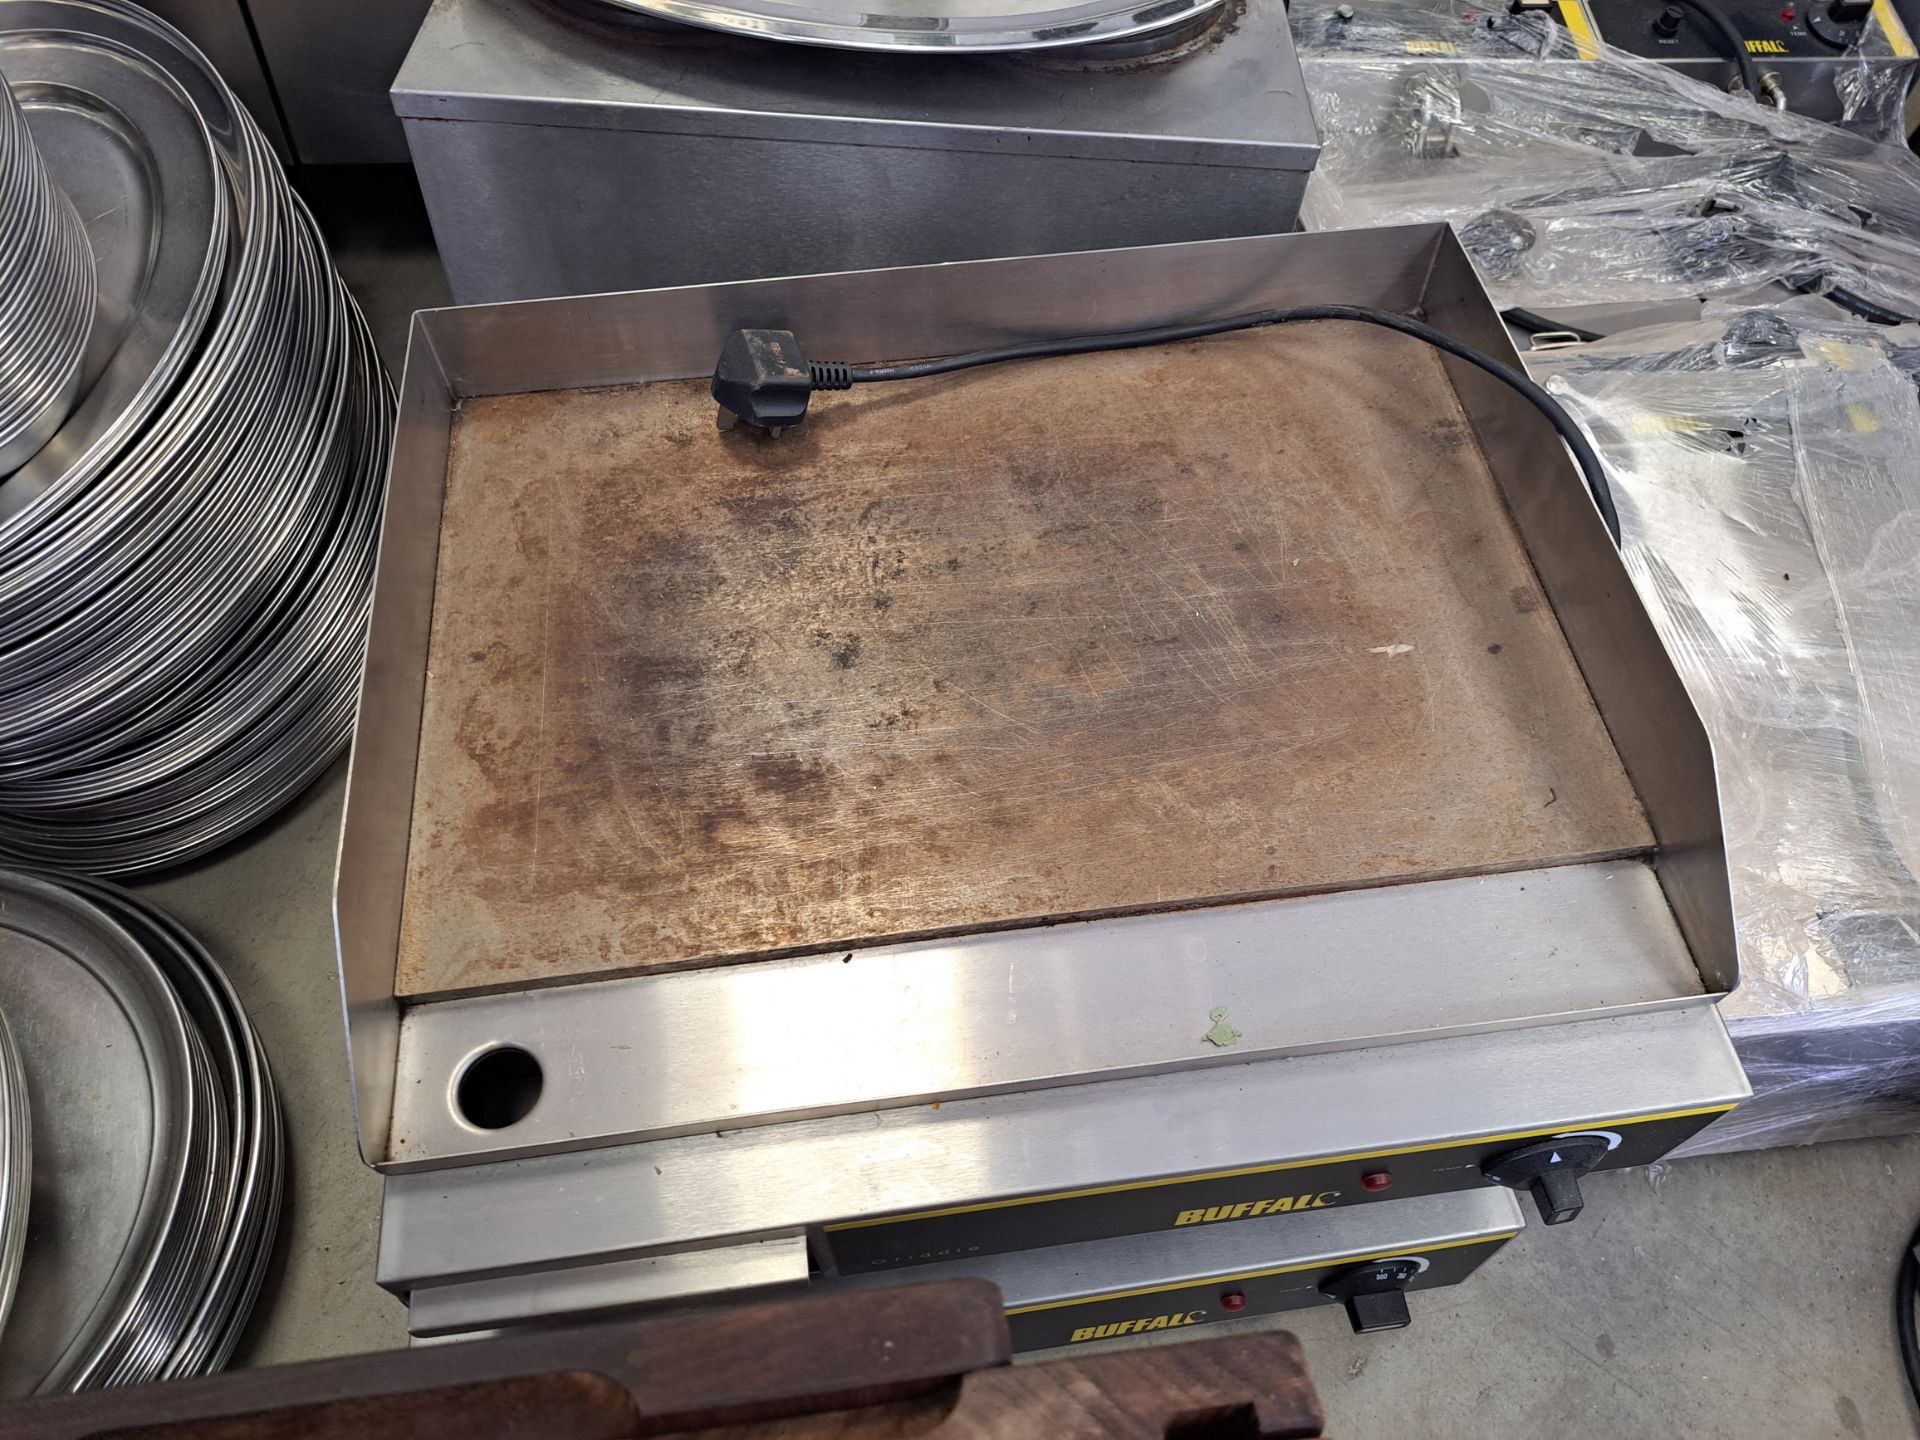 Lot 79. Electric Griddle